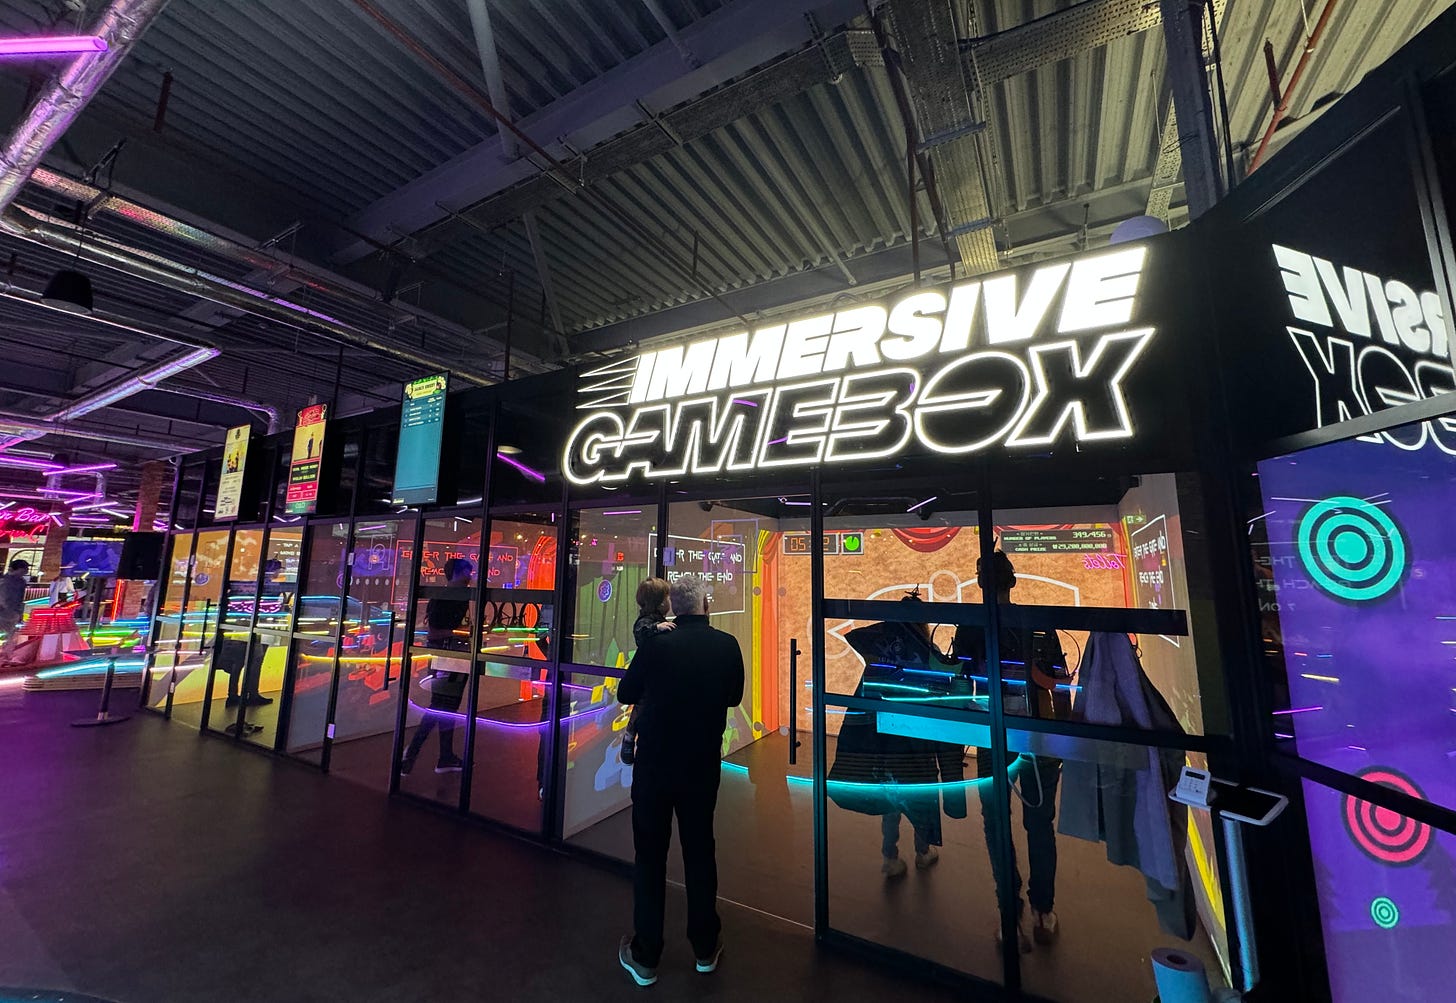 A row of Gamebox rooms; we can see through their rear glass walls into the people playing them inside